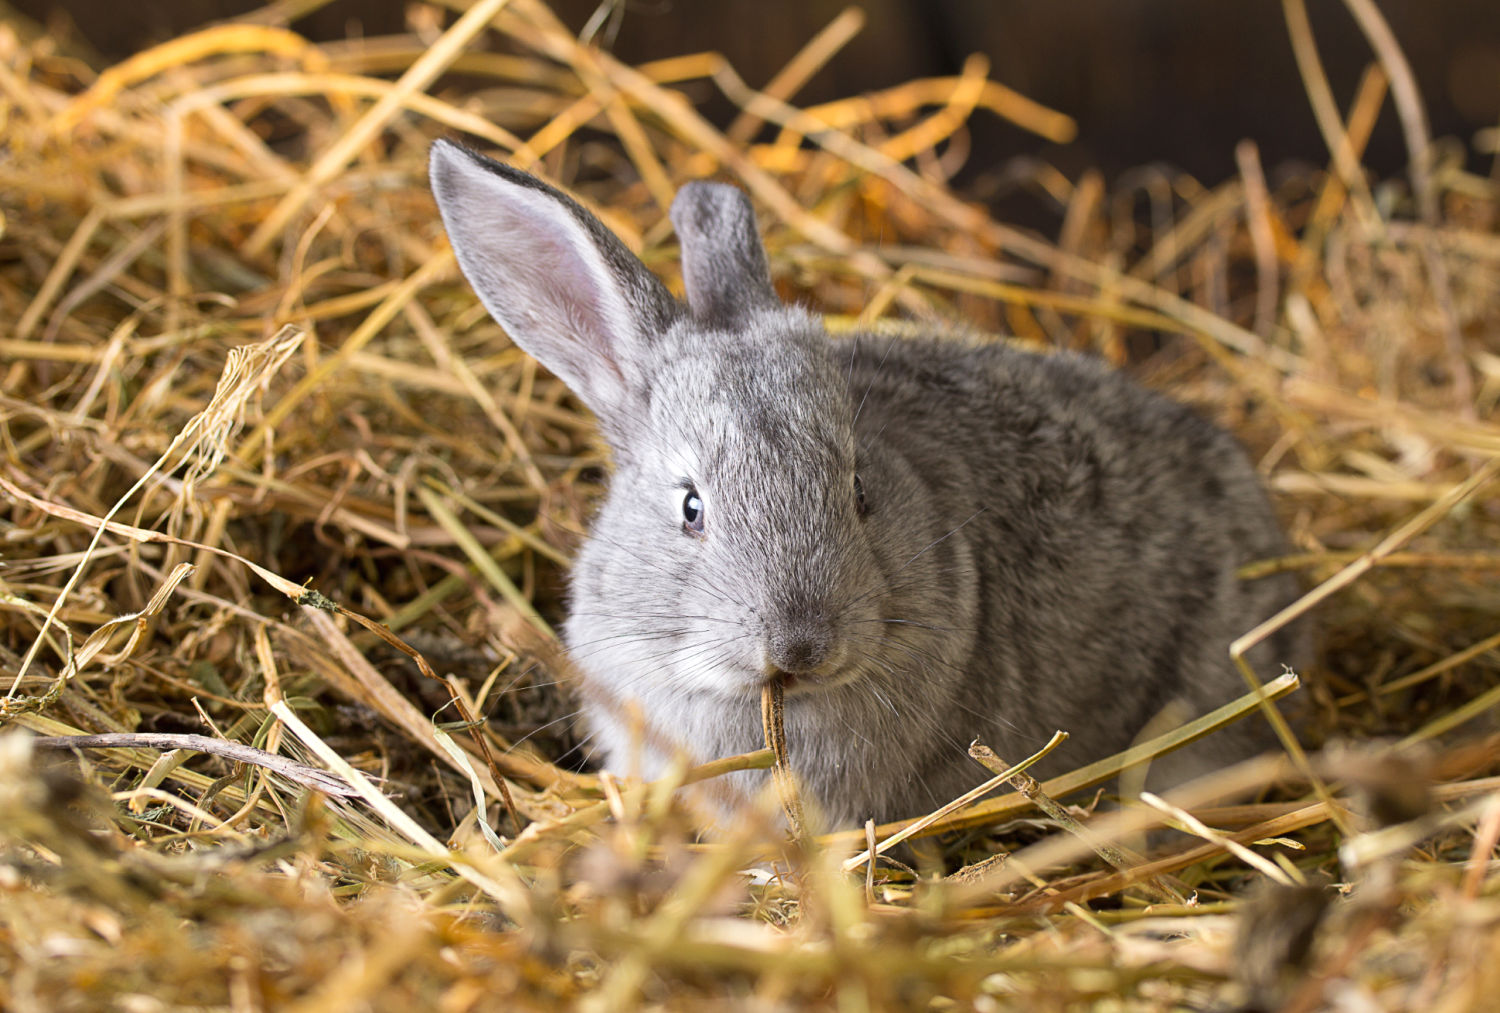 Grey rabbit sitting on straw in a hutch - our day out going to hug a bunny at Easton Farm Park in Suffolk